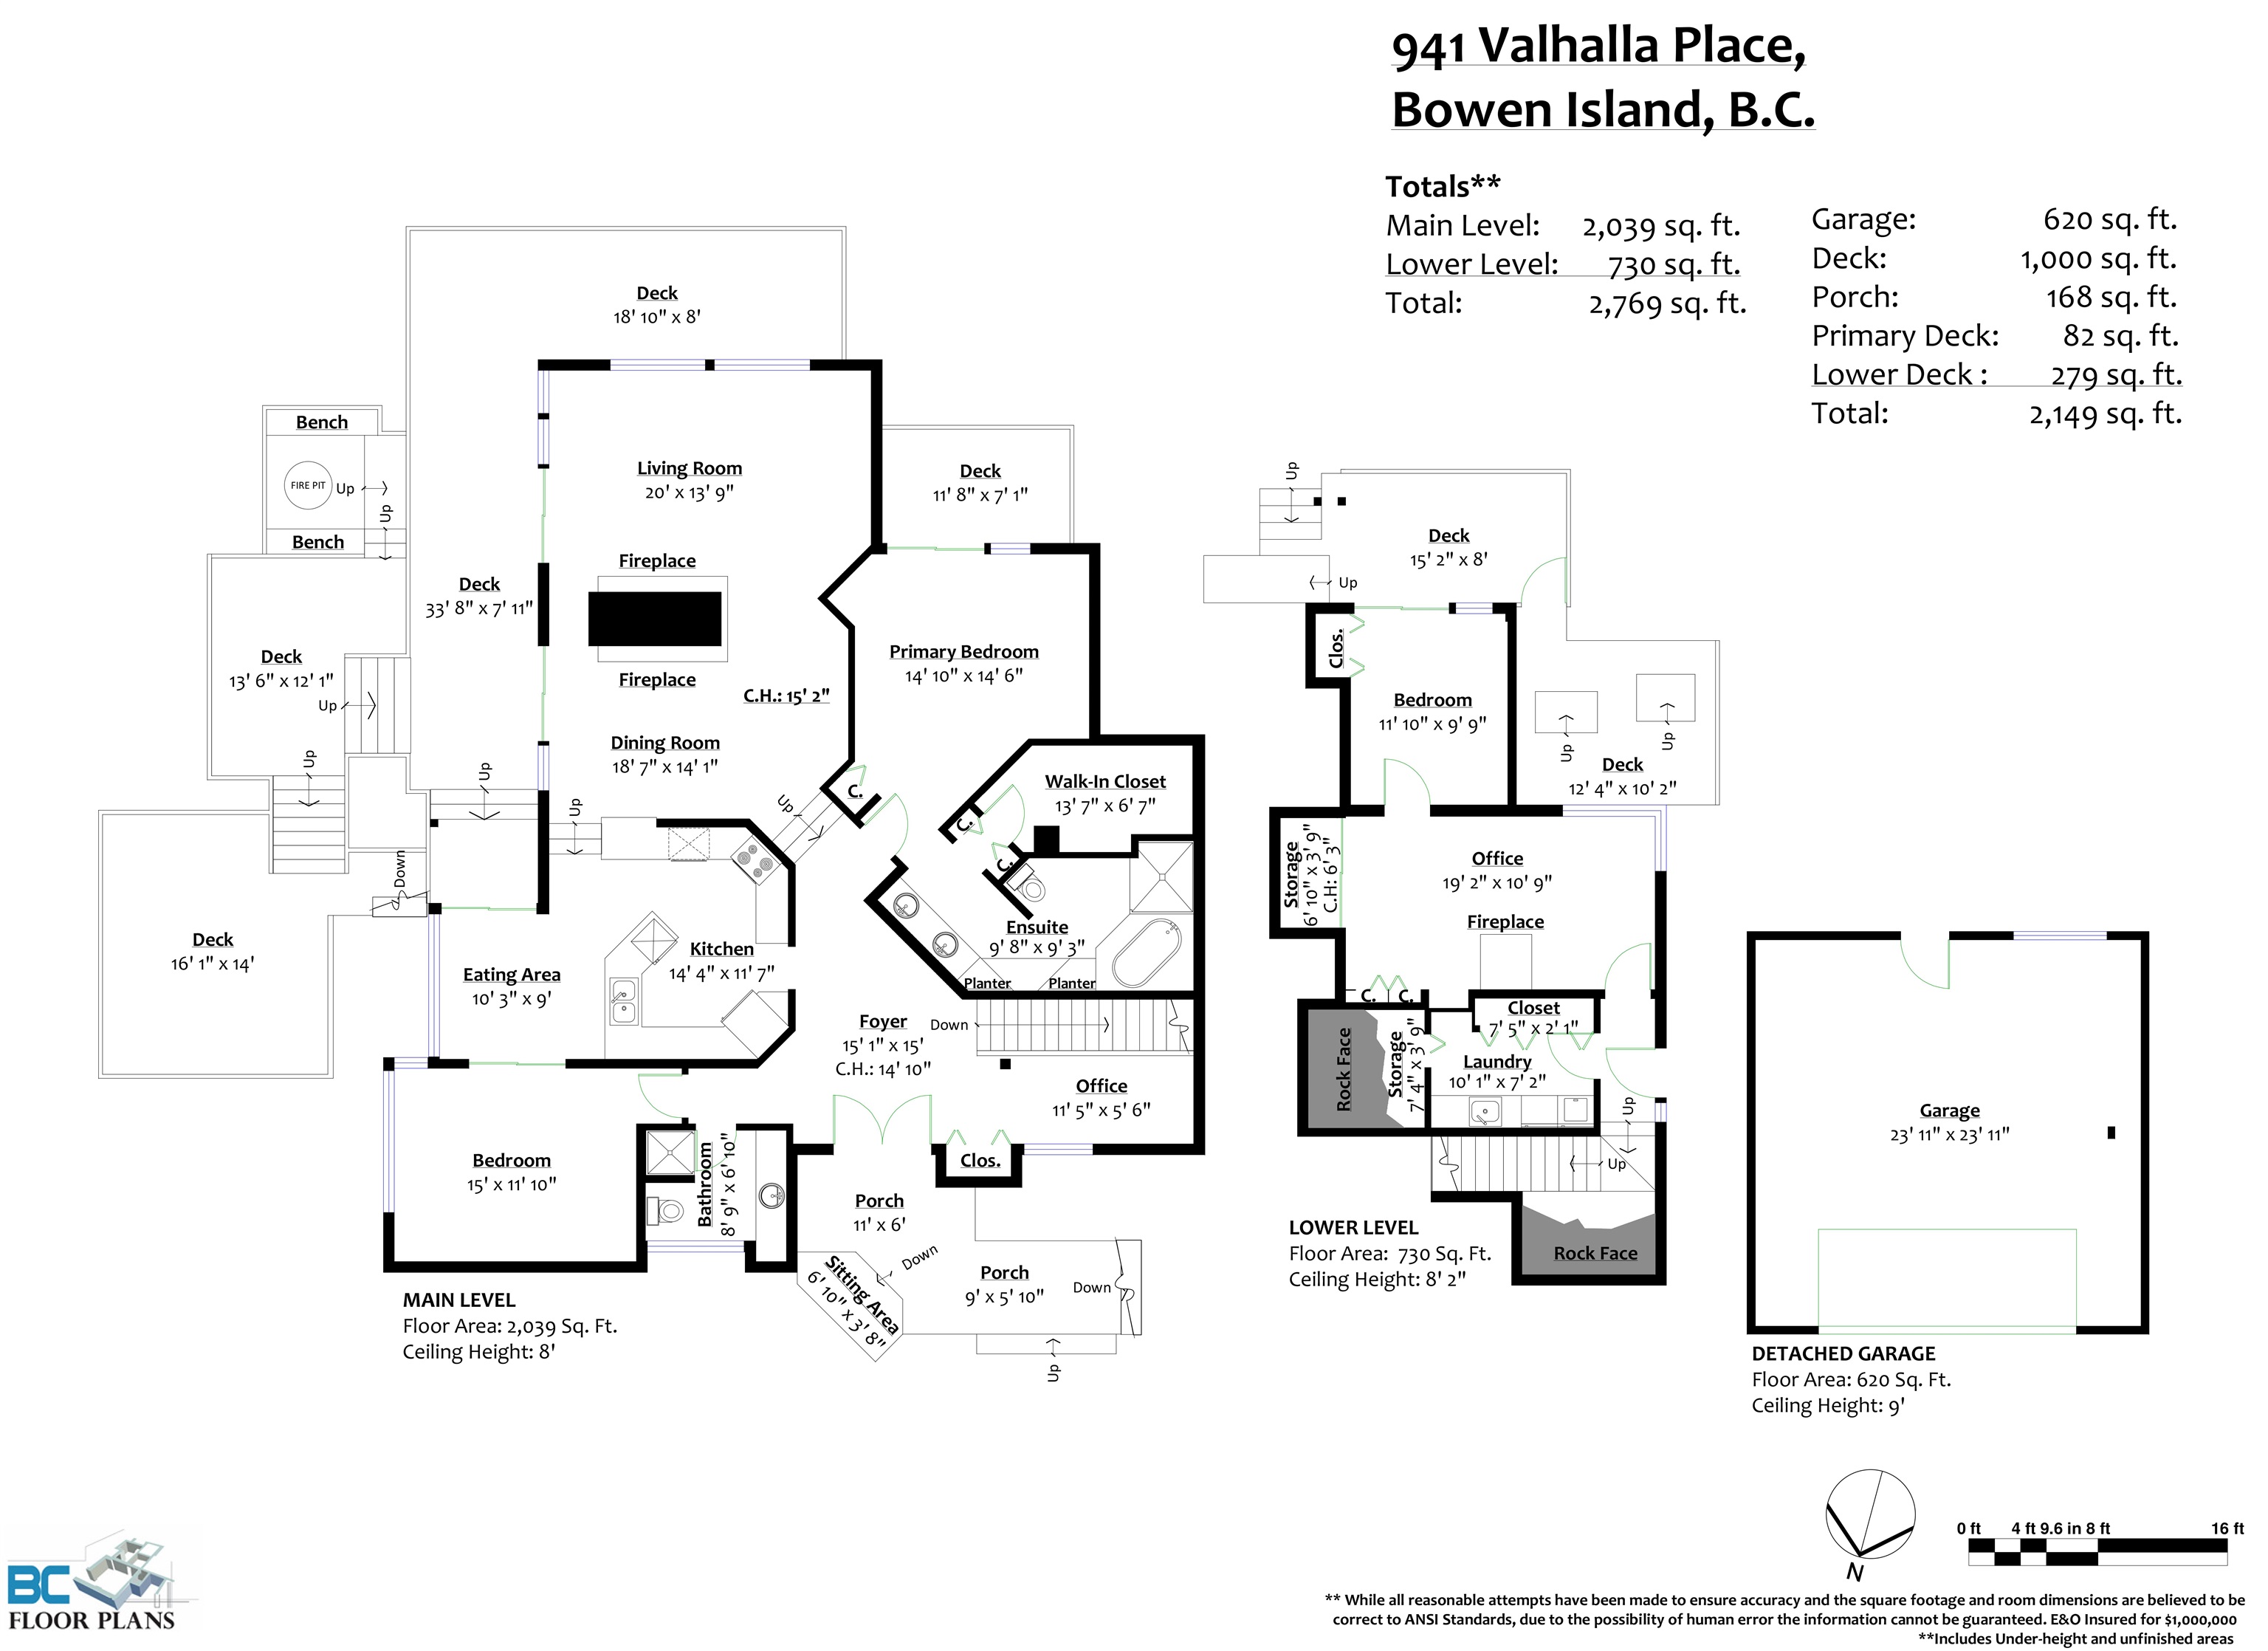 Listing image of 941 VALHALLA PLACE